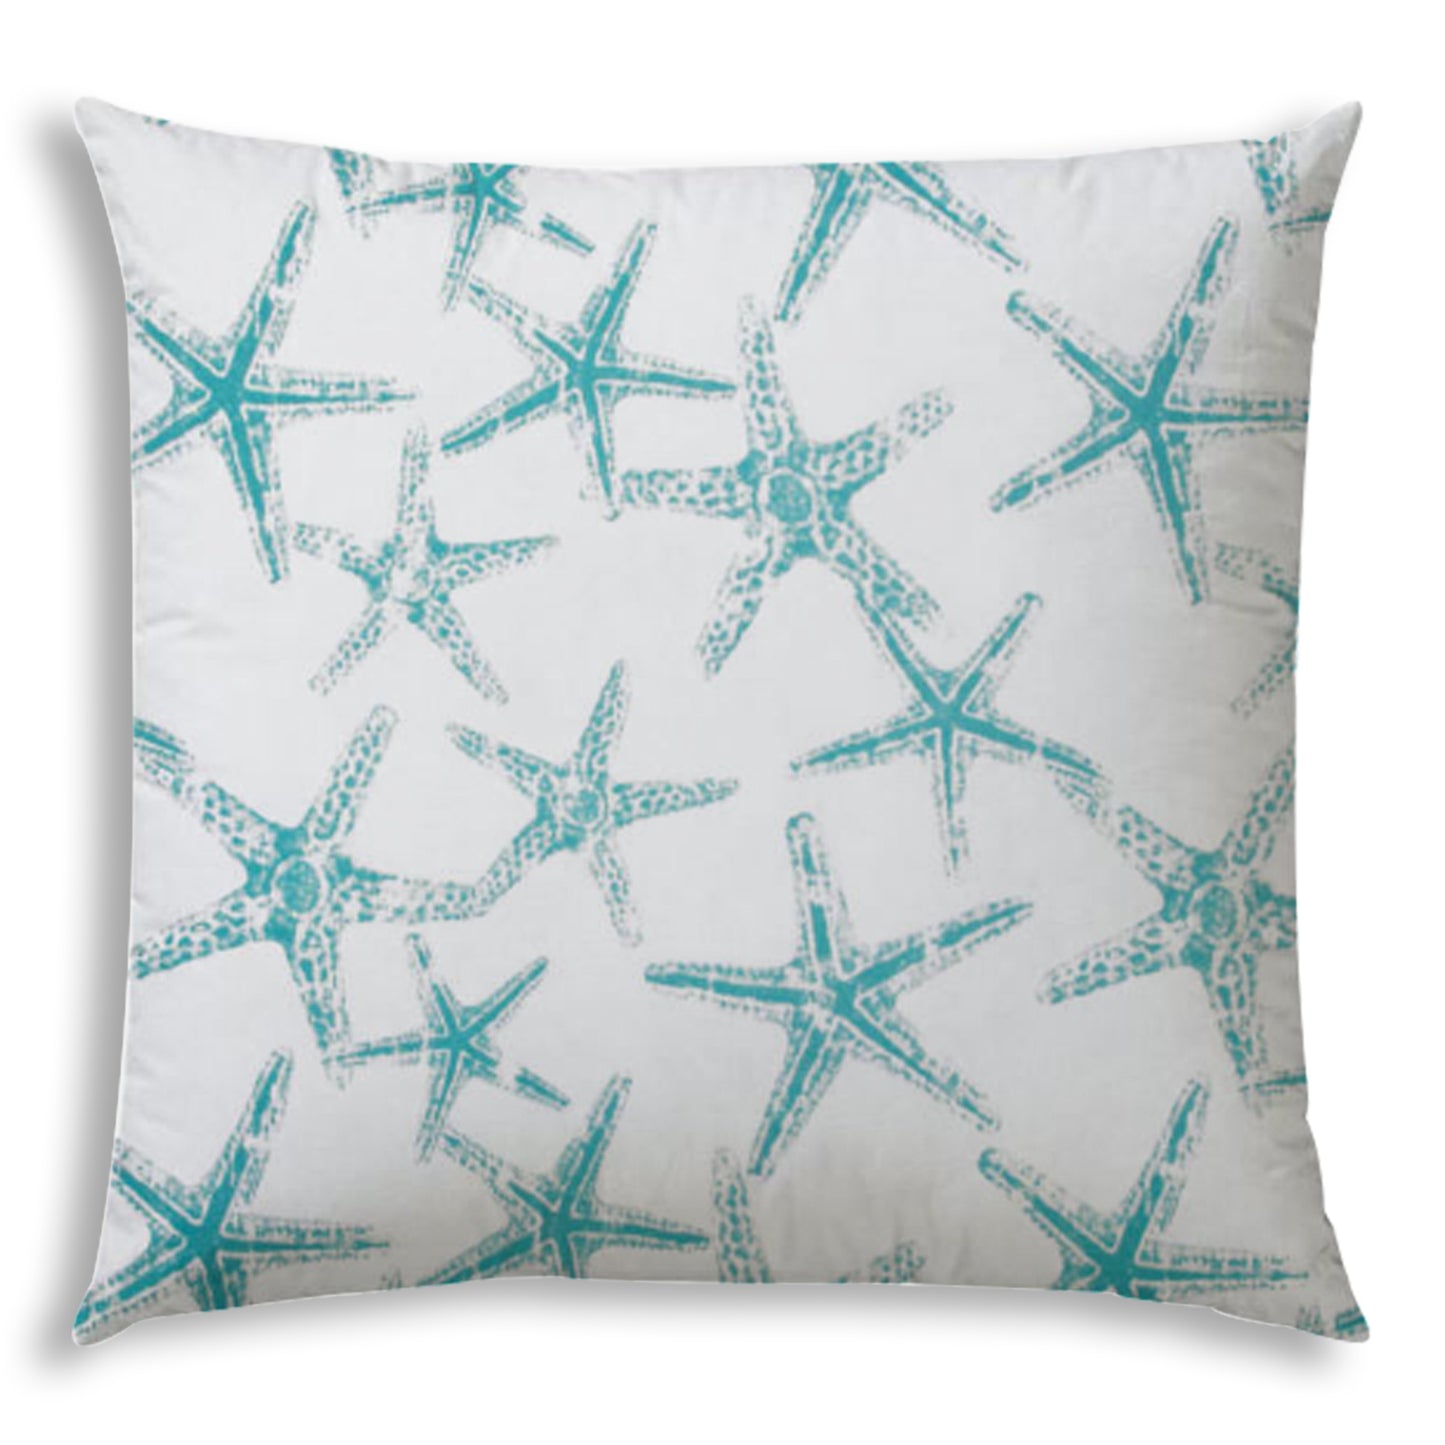 FLOATING STARFISH Turquoise Indoor/Outdoor Pillow - Sewn Closure